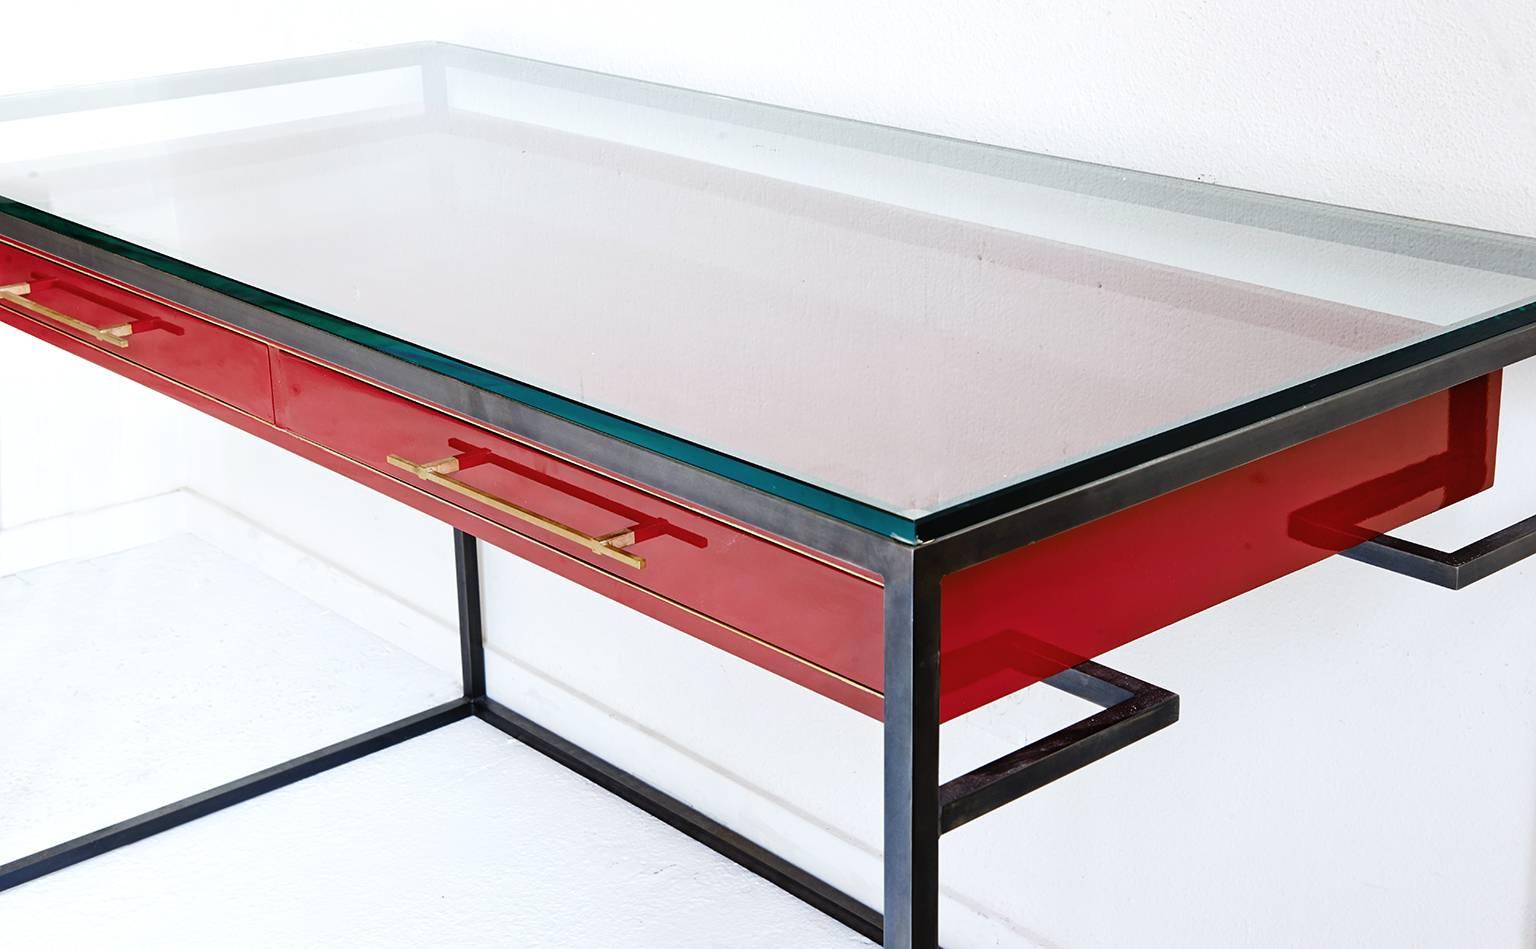 This high-gloss red enamel desk is a sleek modern writing desk with brass inlay and drawer pulls set in a blackened steel frame.